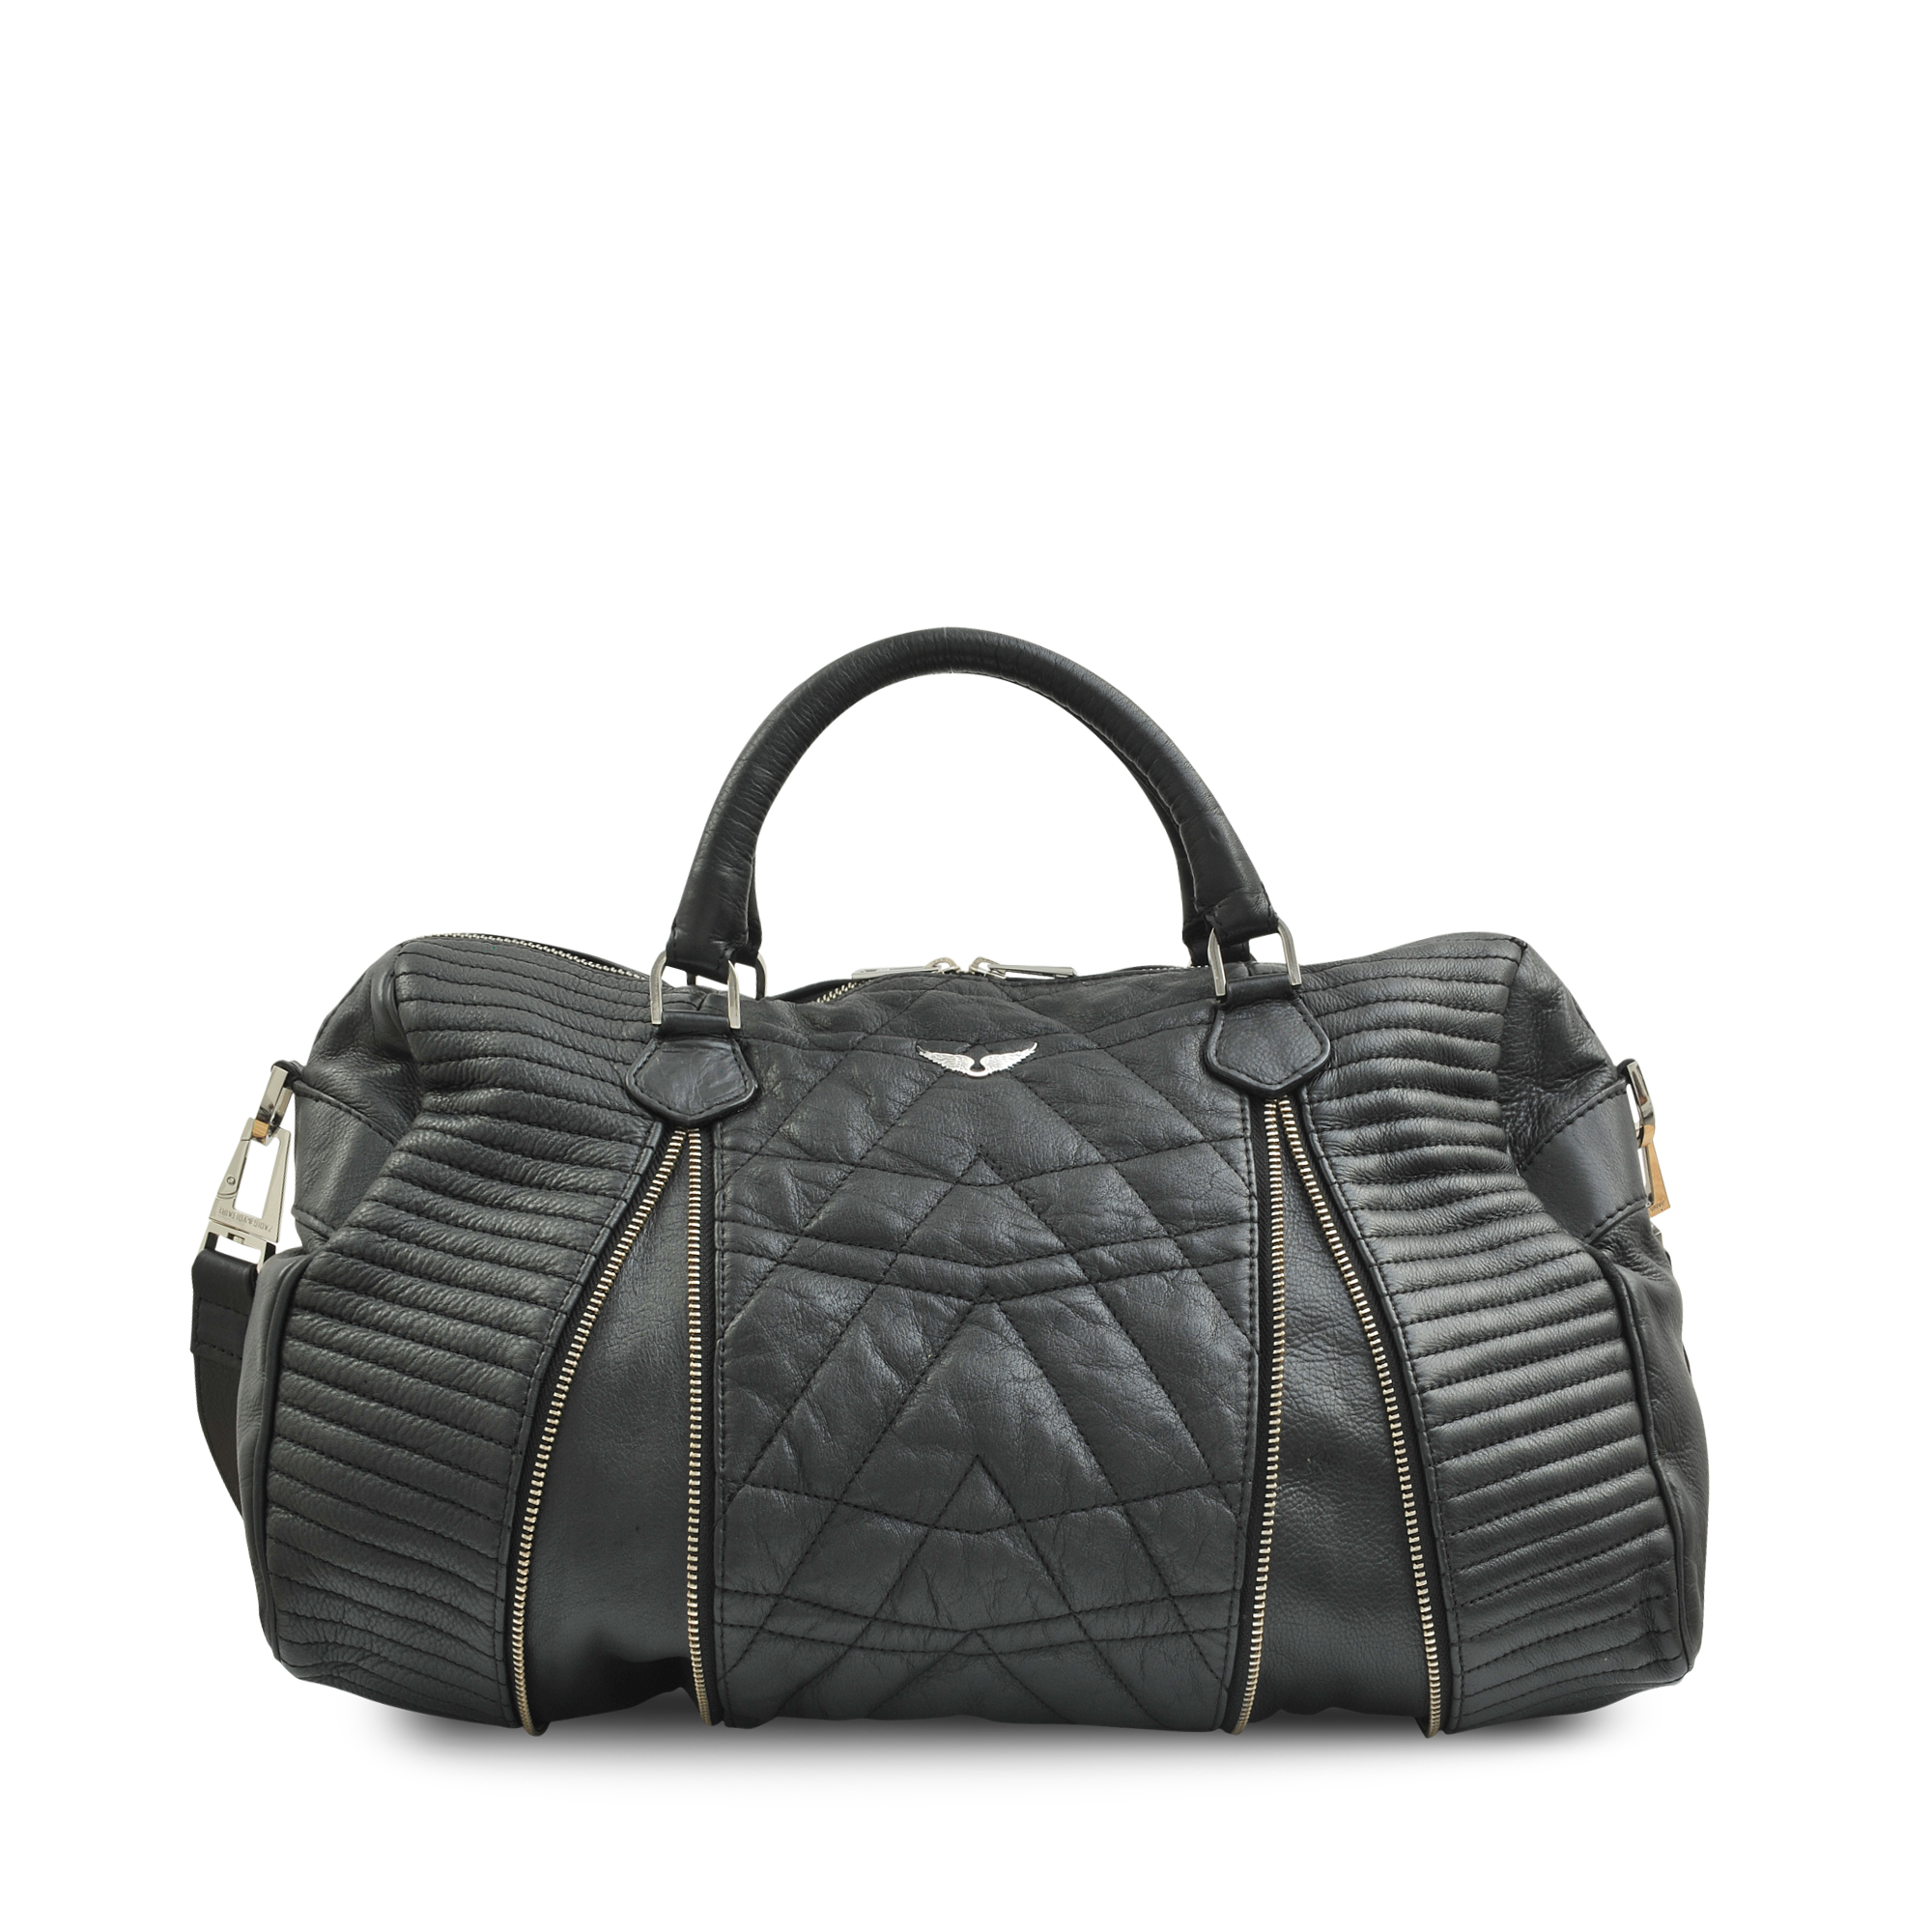 Zadig & Voltaire Sunny Quilted Bag in Black - Lyst